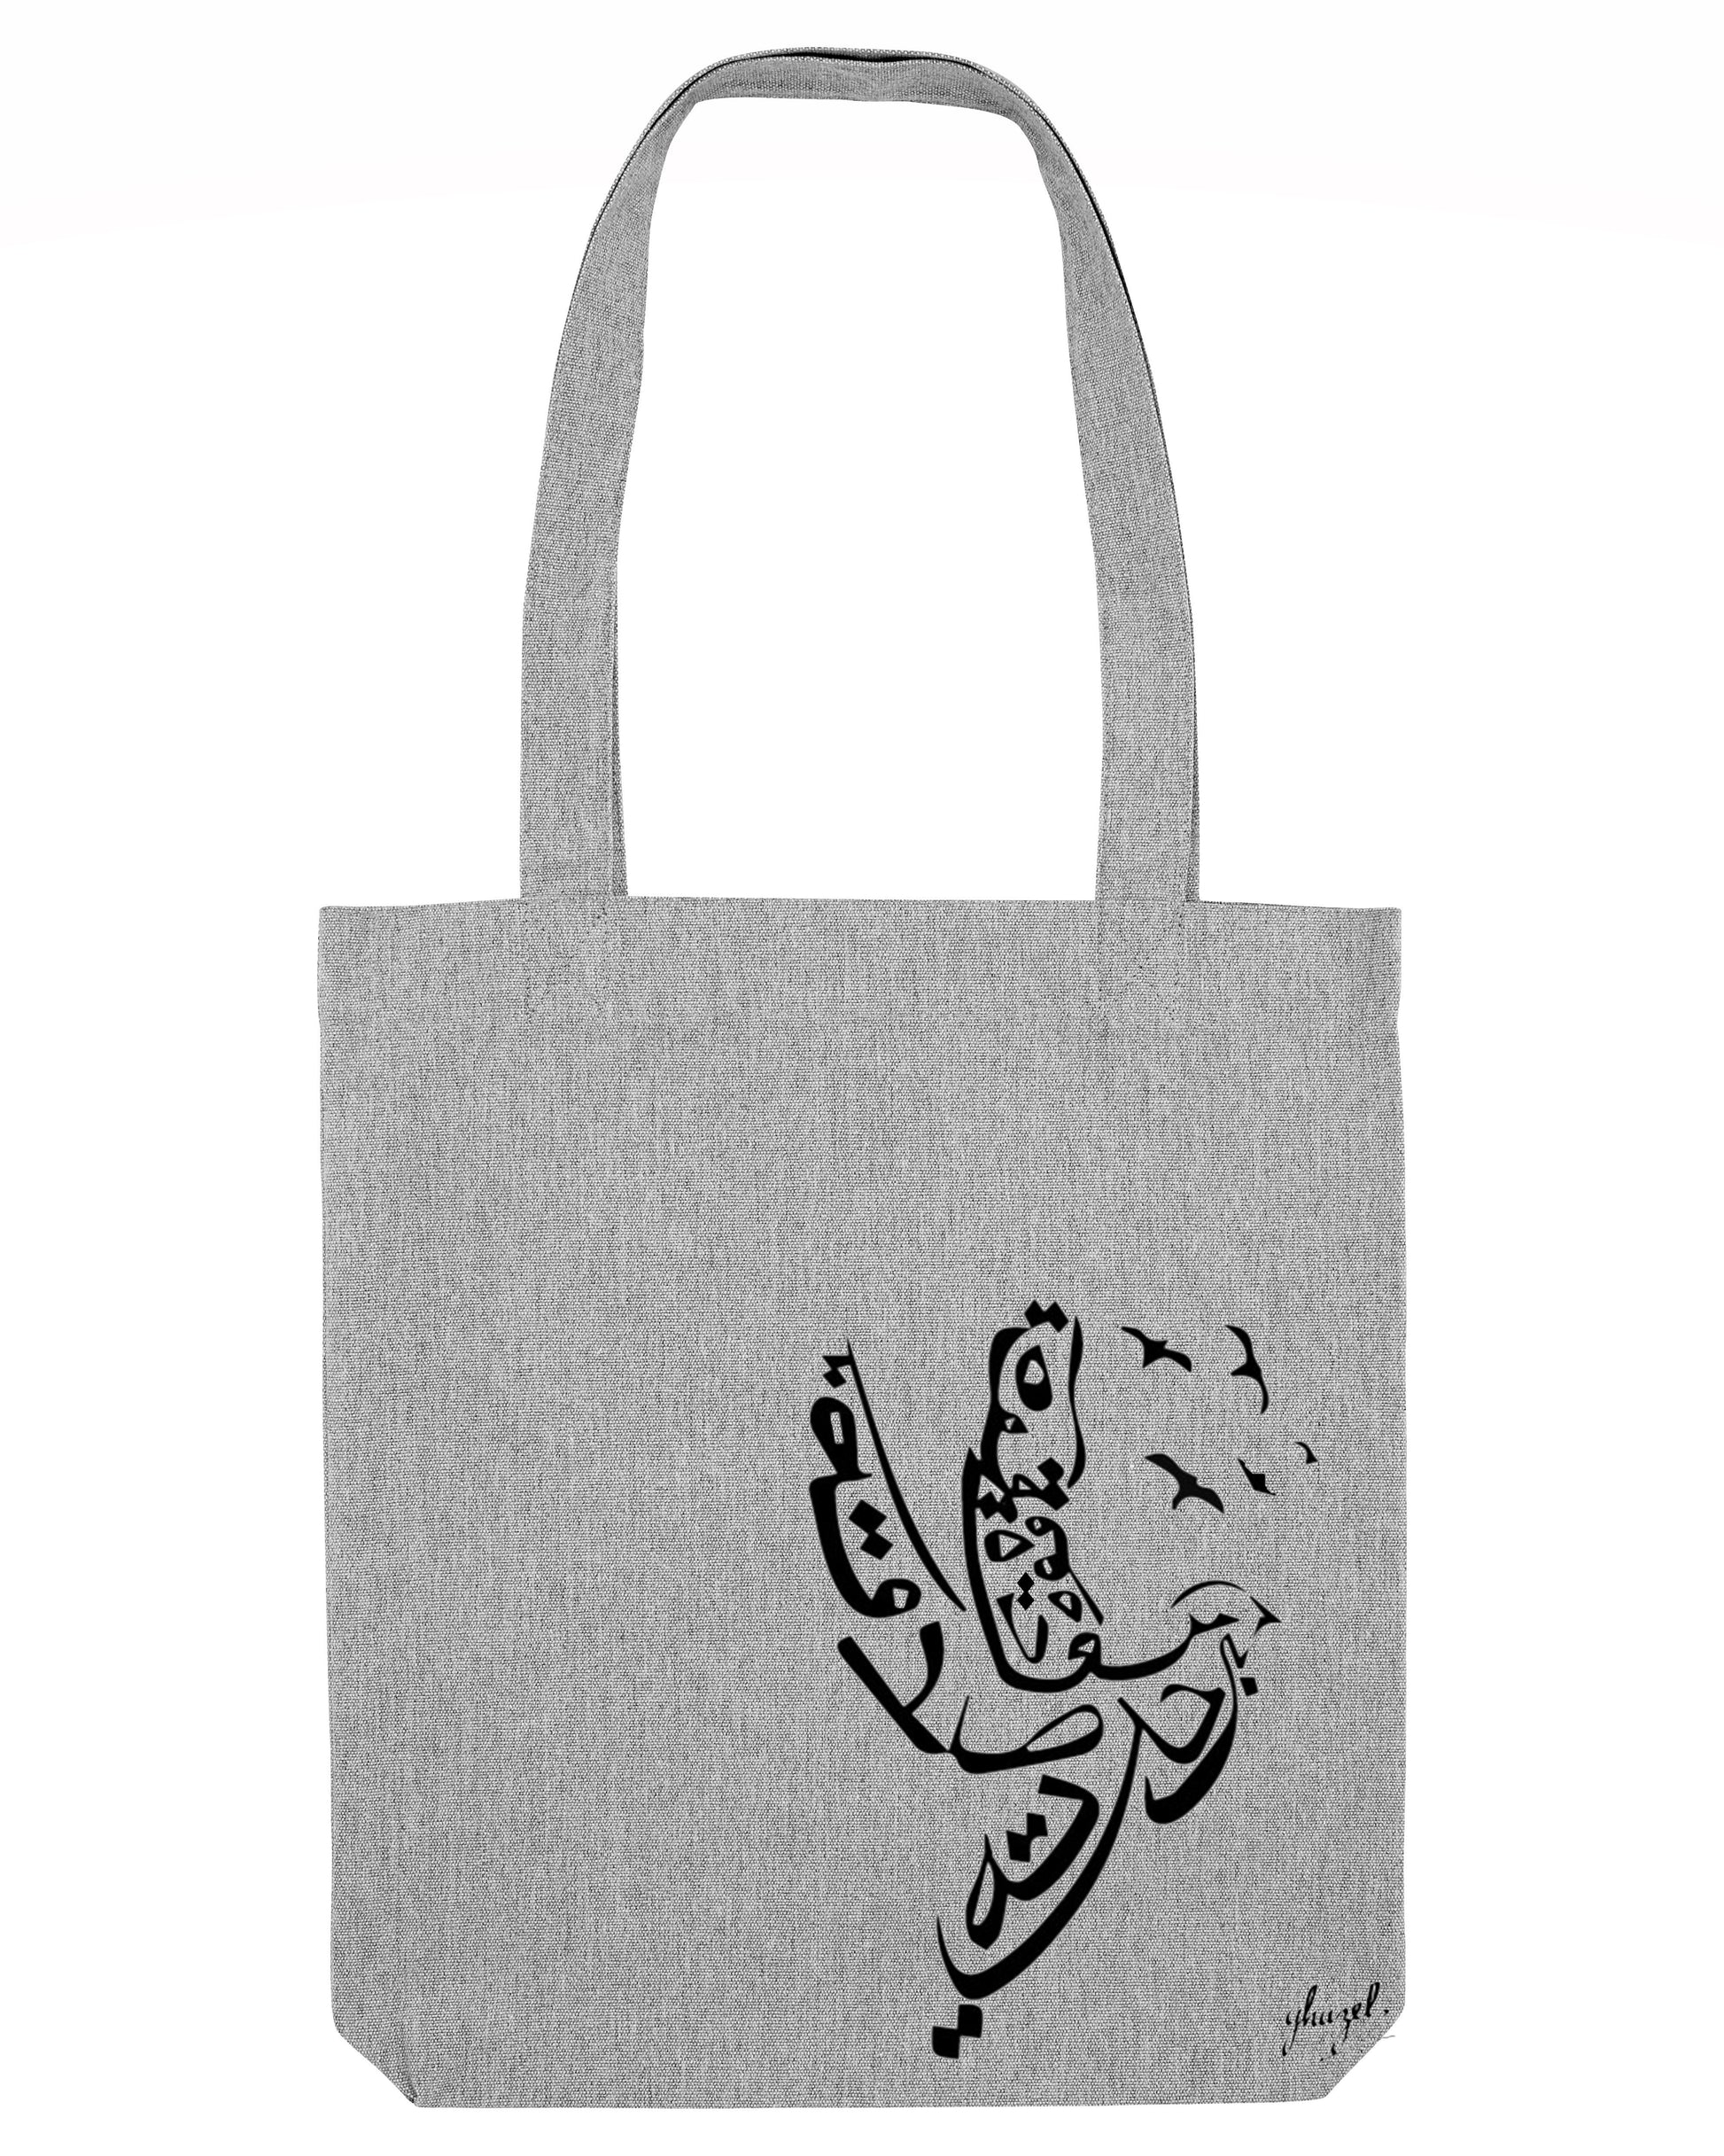 Tote bag Colombe calligraphie - Ghazel Boutique